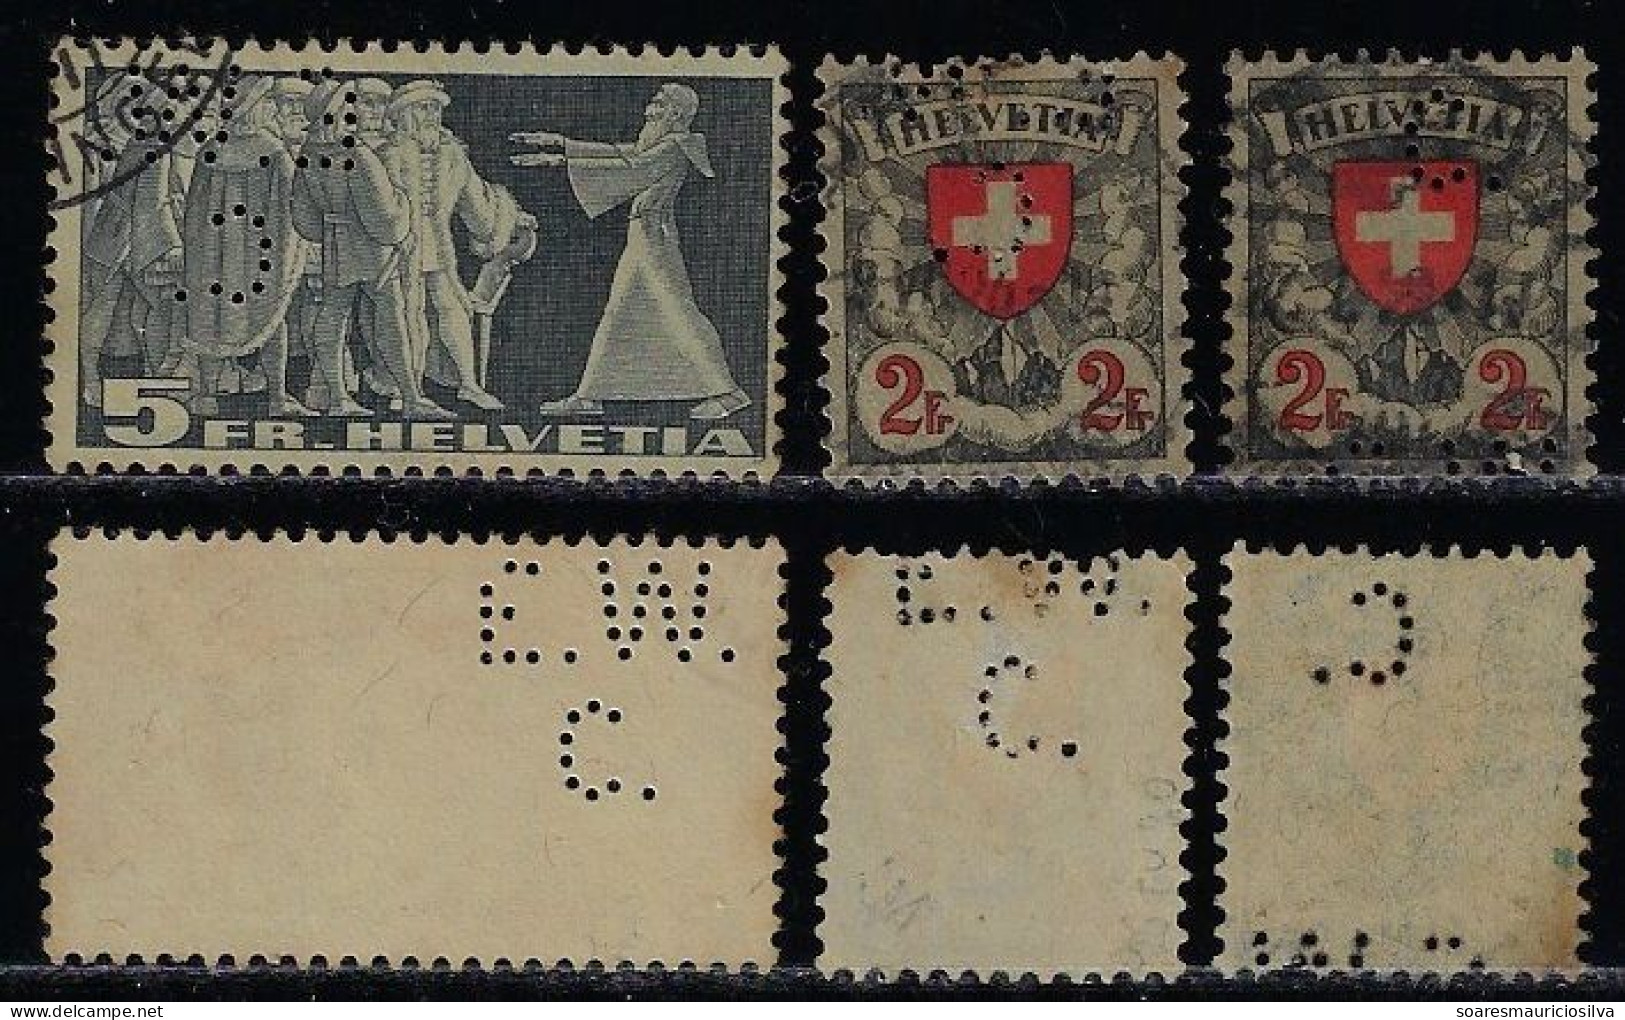 Switzerland 1894/1940 3 Stamp With Perfin E.W./C. By Escher-Wyss & Co Machine Factory In Zurich Lochung Perfore - Perforés